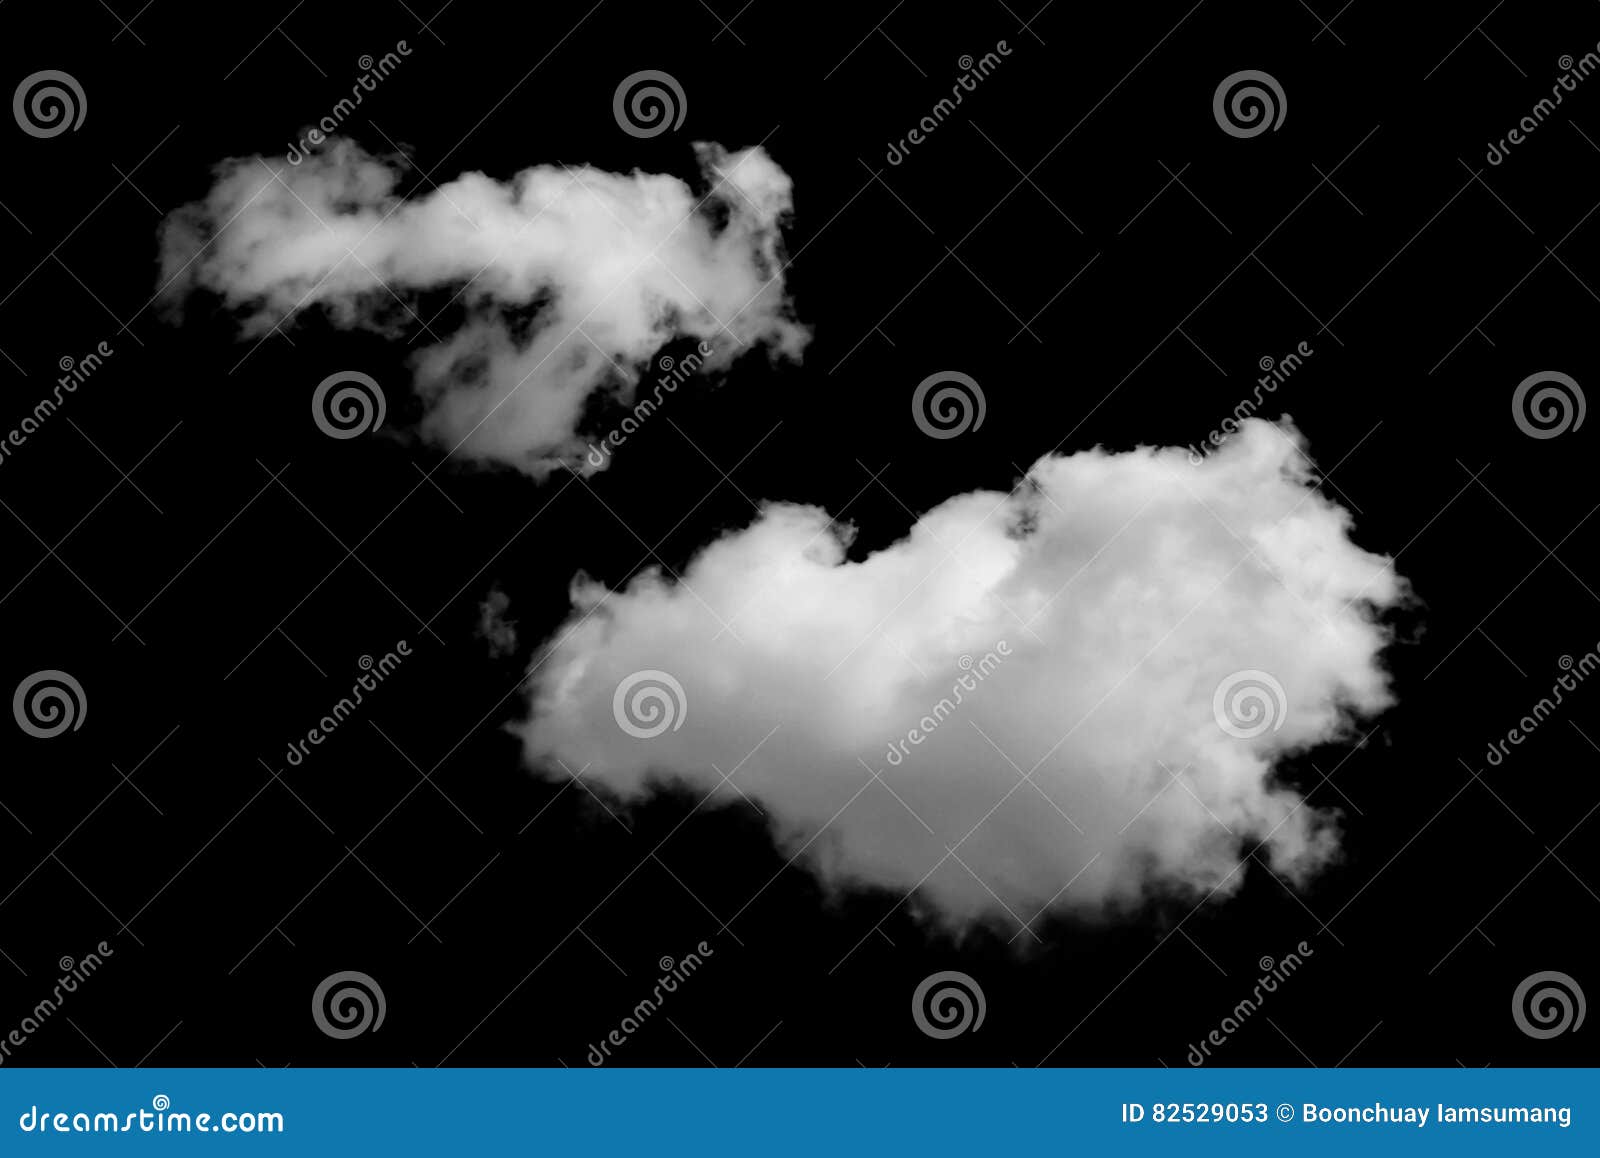 whtie clouds  on black background